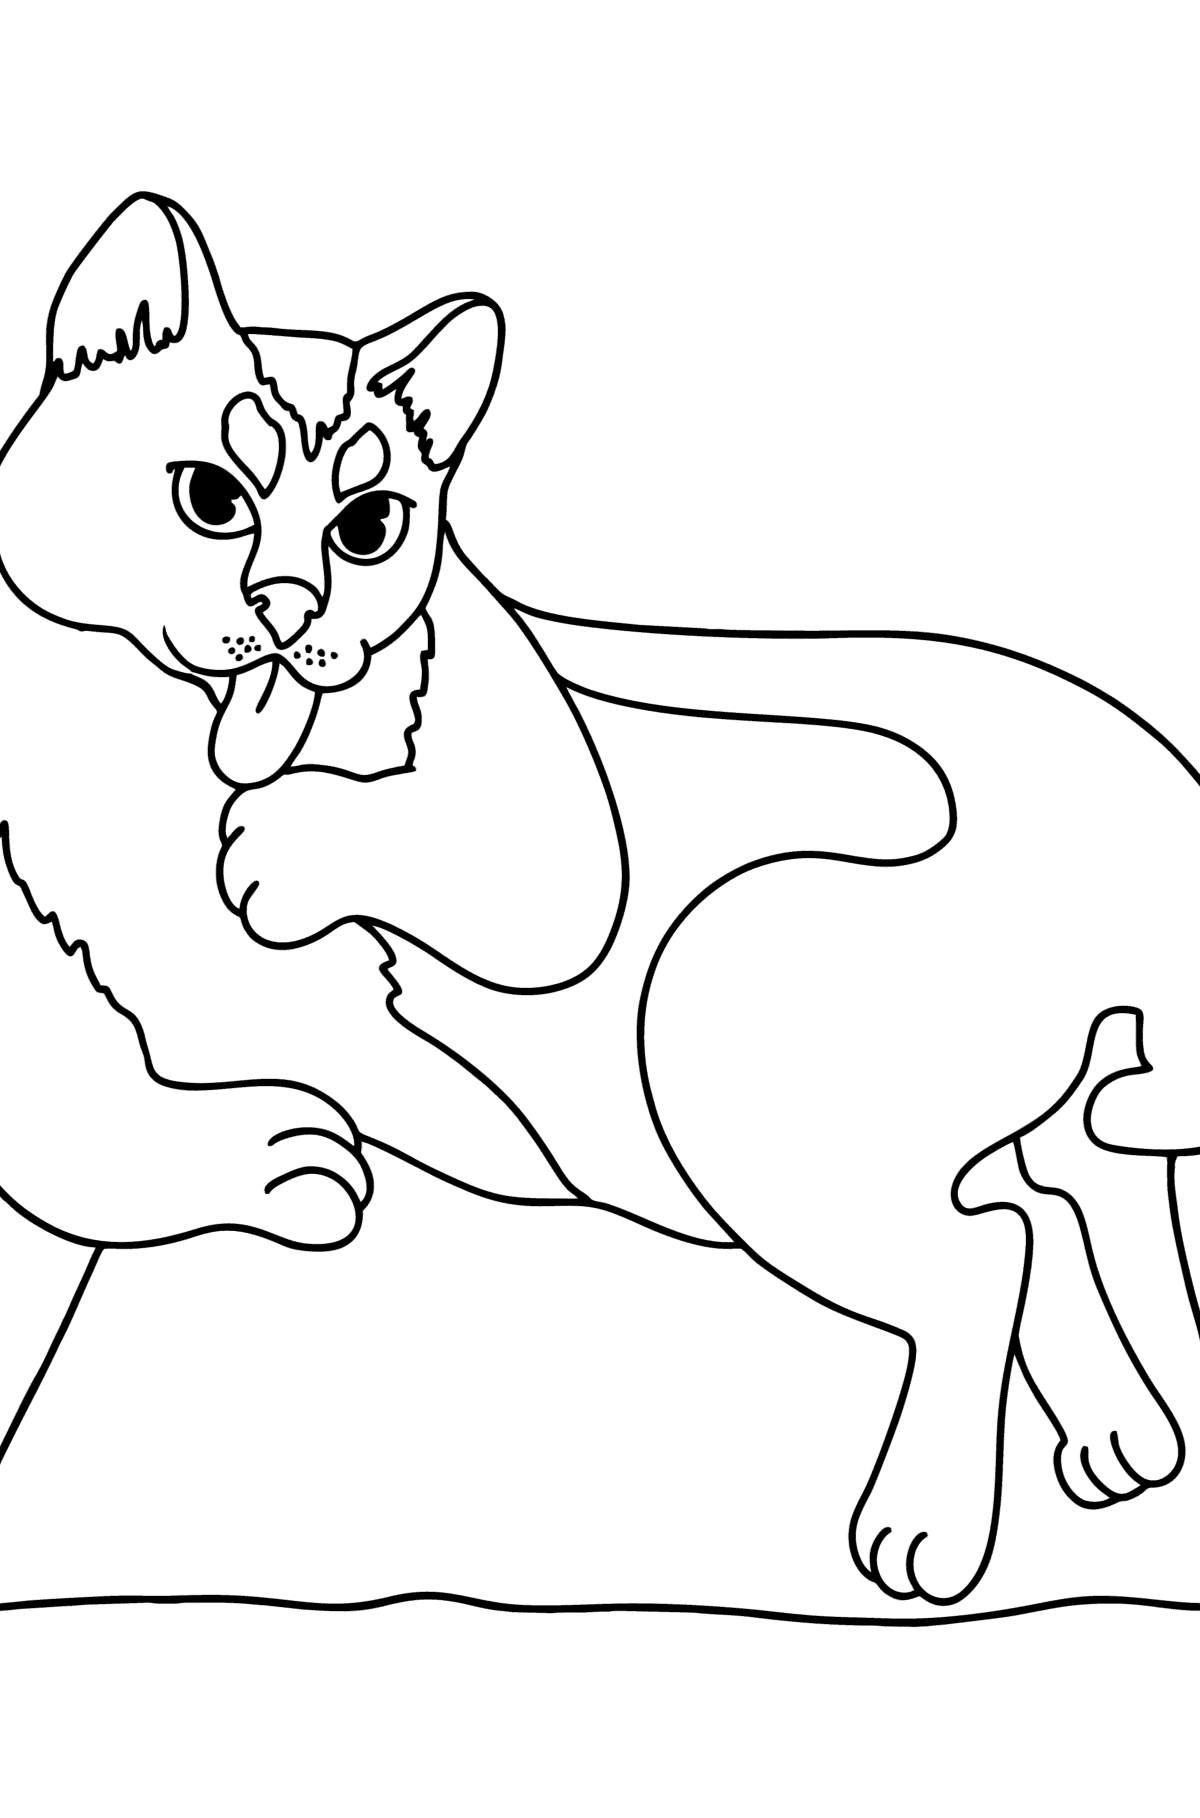 Black Cat coloring page - Coloring Pages for Kids